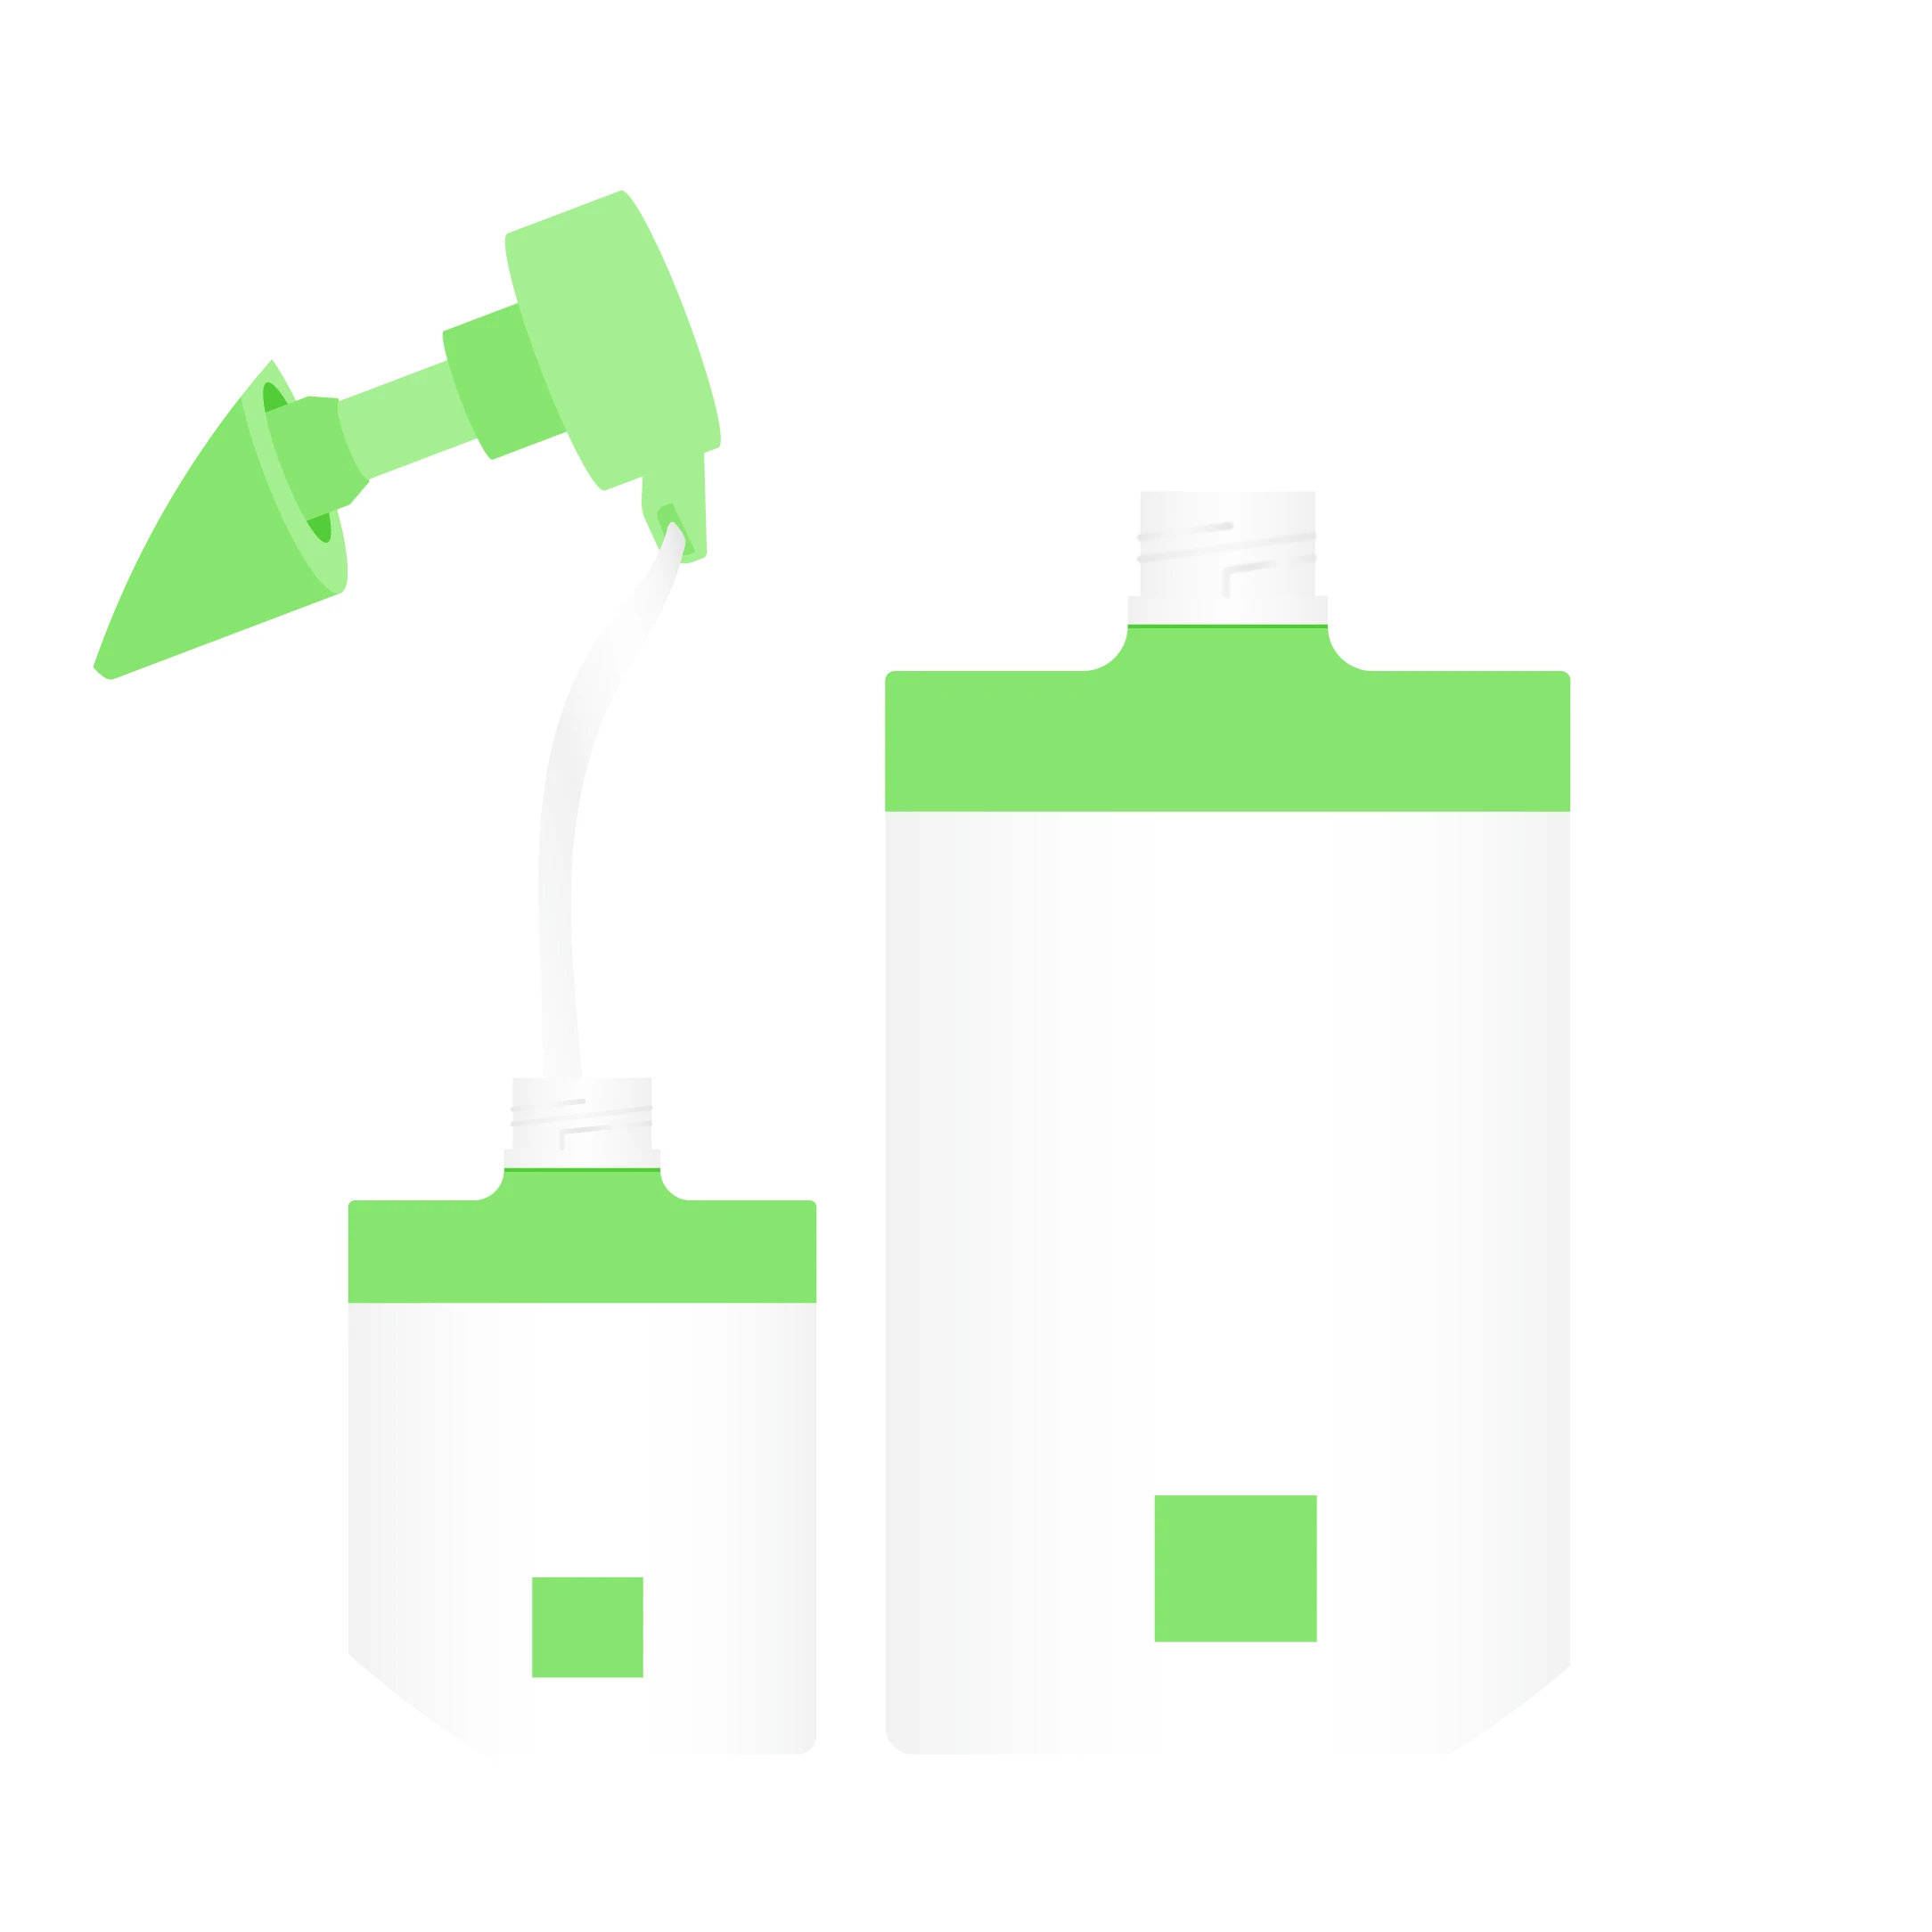 Illustration of two bottles being refilled